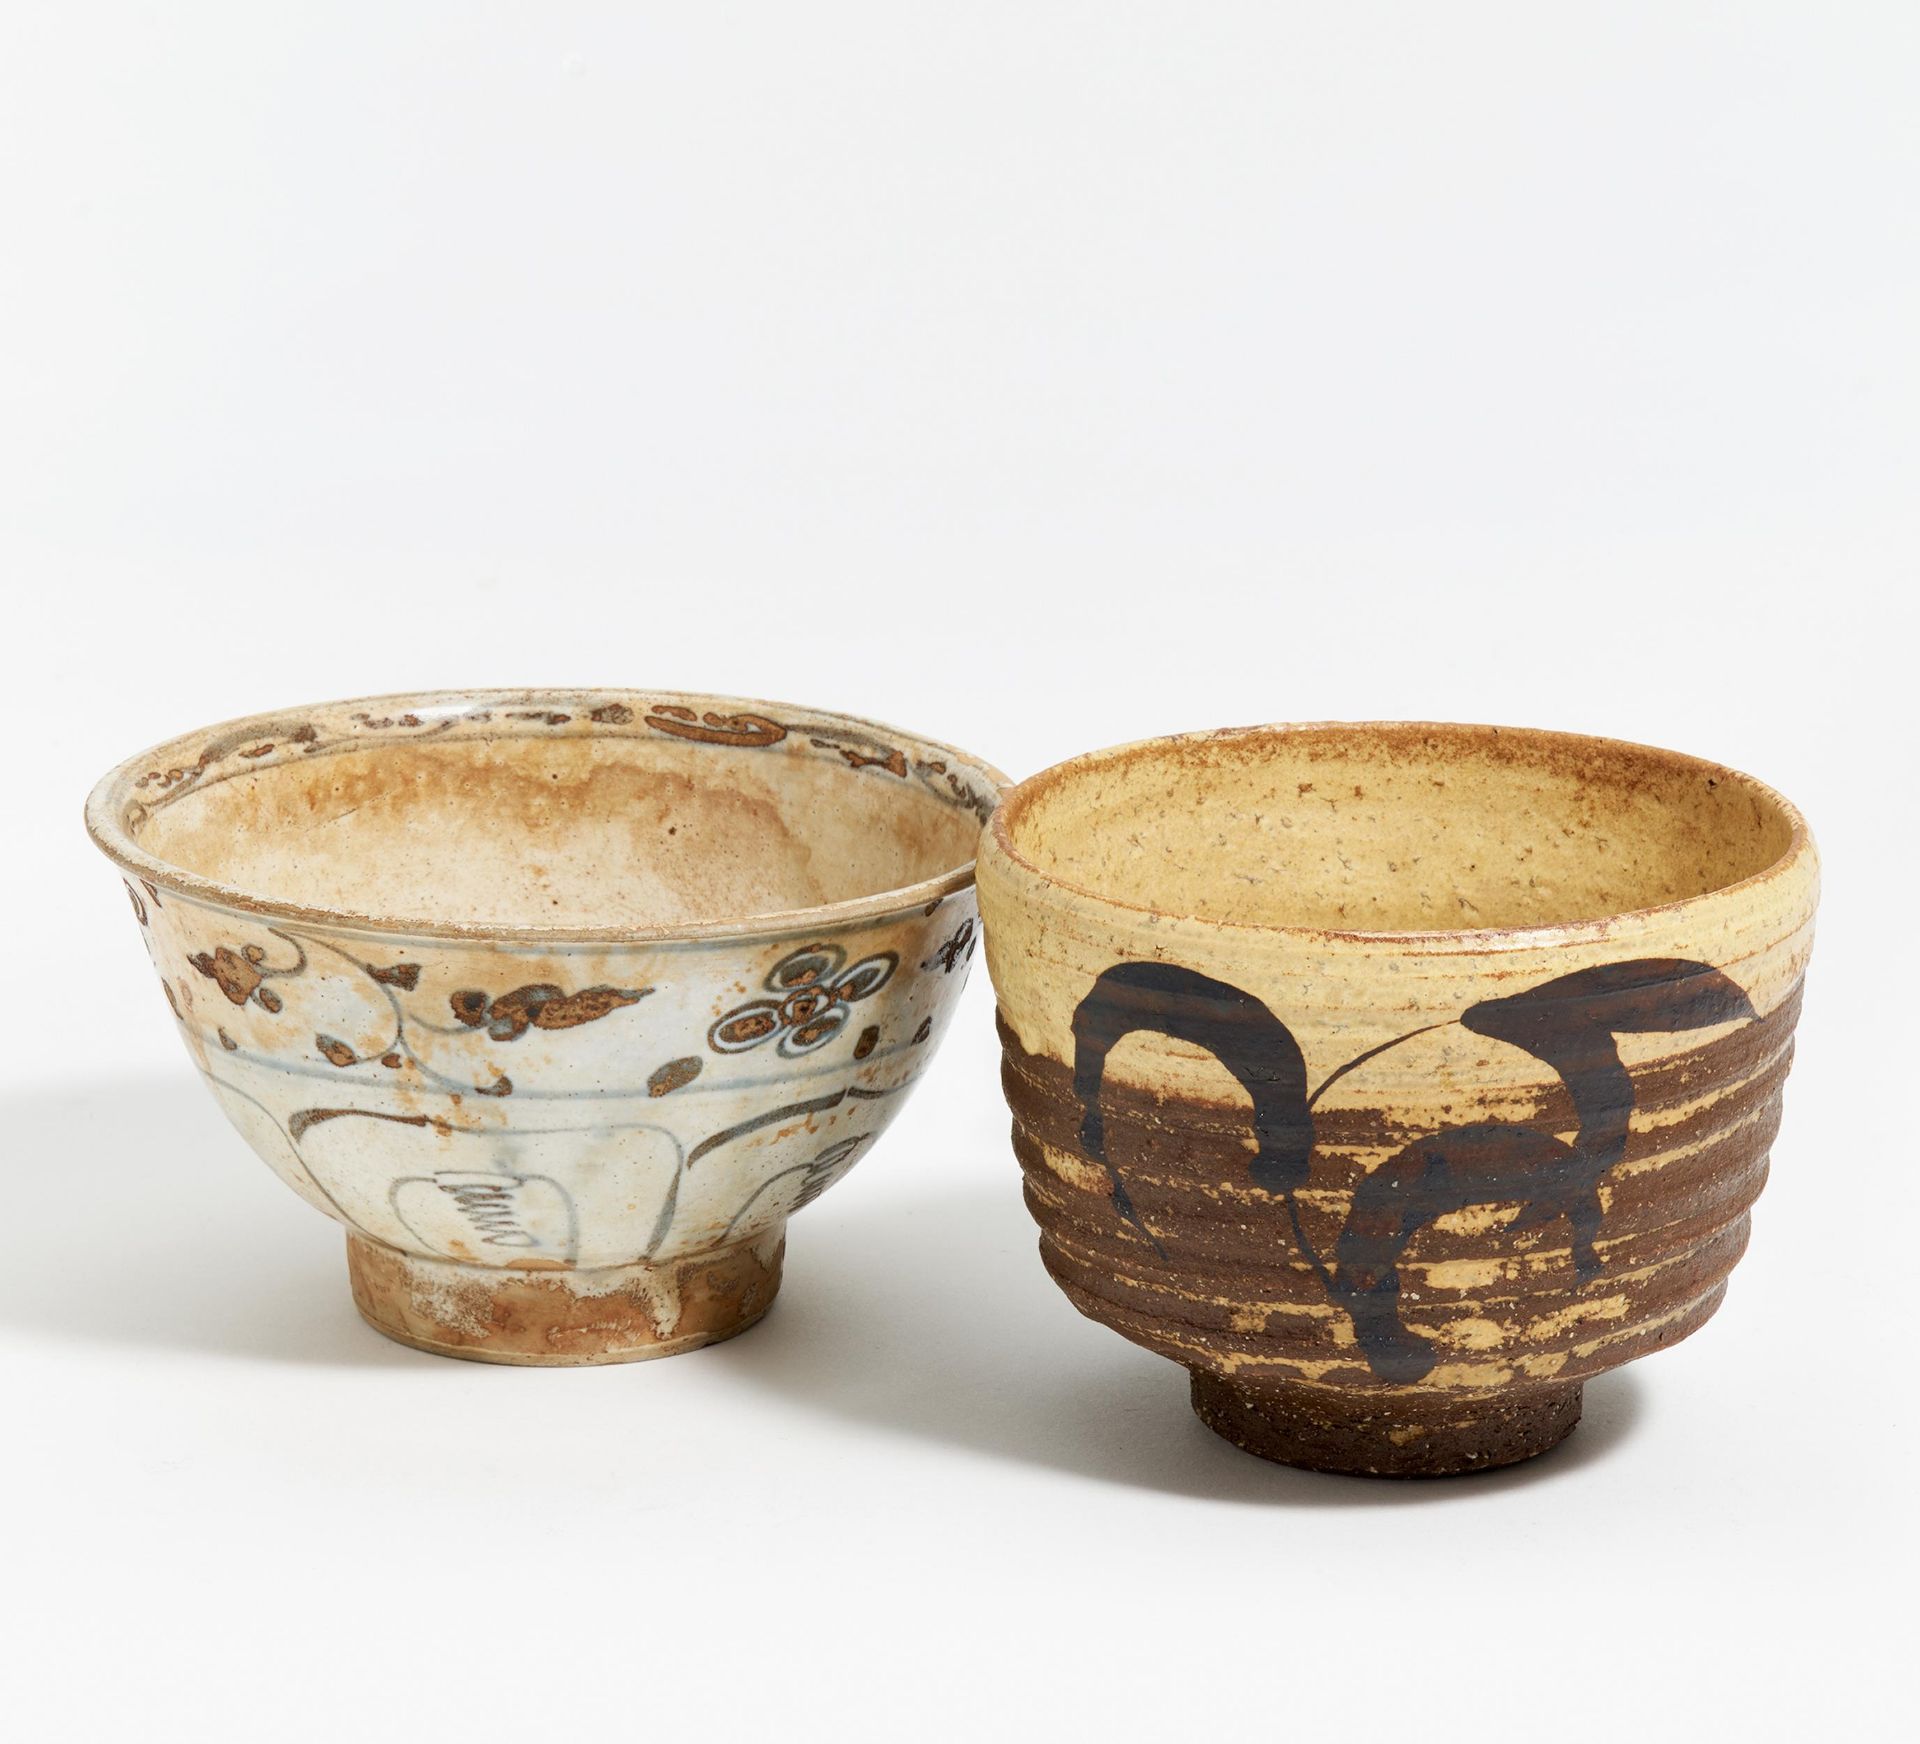 CHAWAN IN VIETNAMESE STYLE AND CHAWAN WITH LEAFY TWIG. Vietnam and Japan. 16th and 20th c. a)